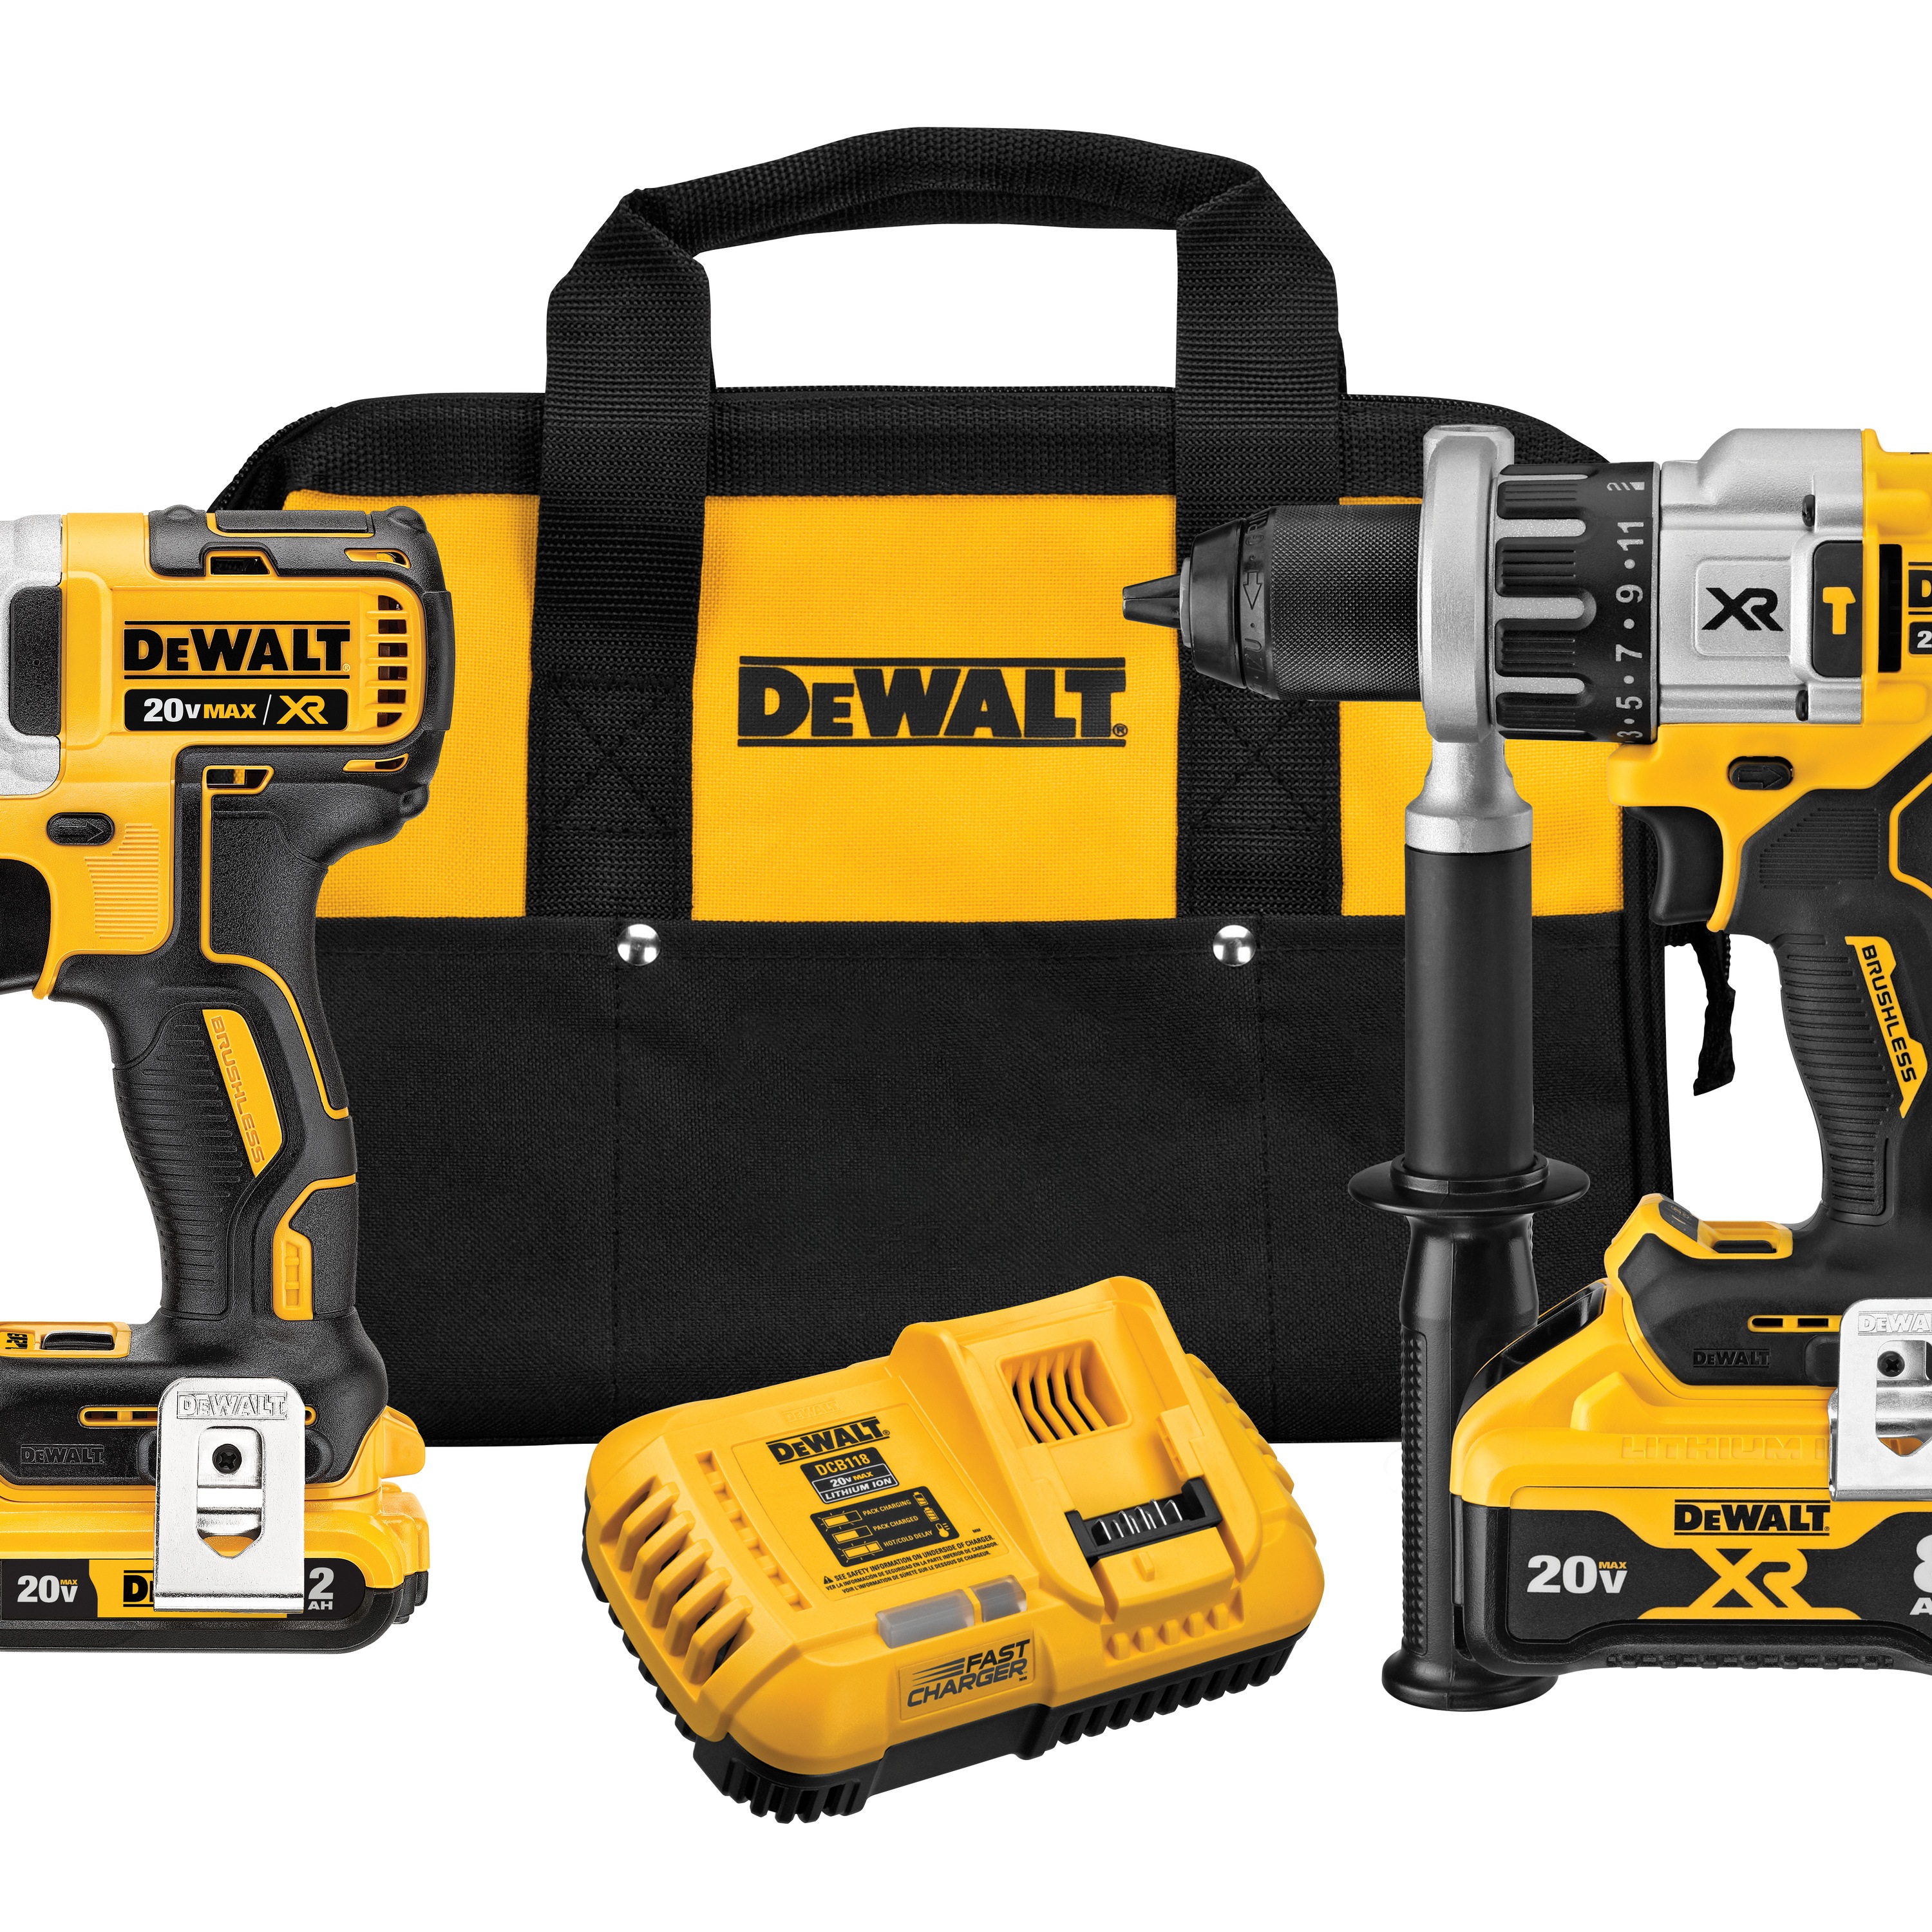 hammer drill and impact driver with POWER DETECT tool kit